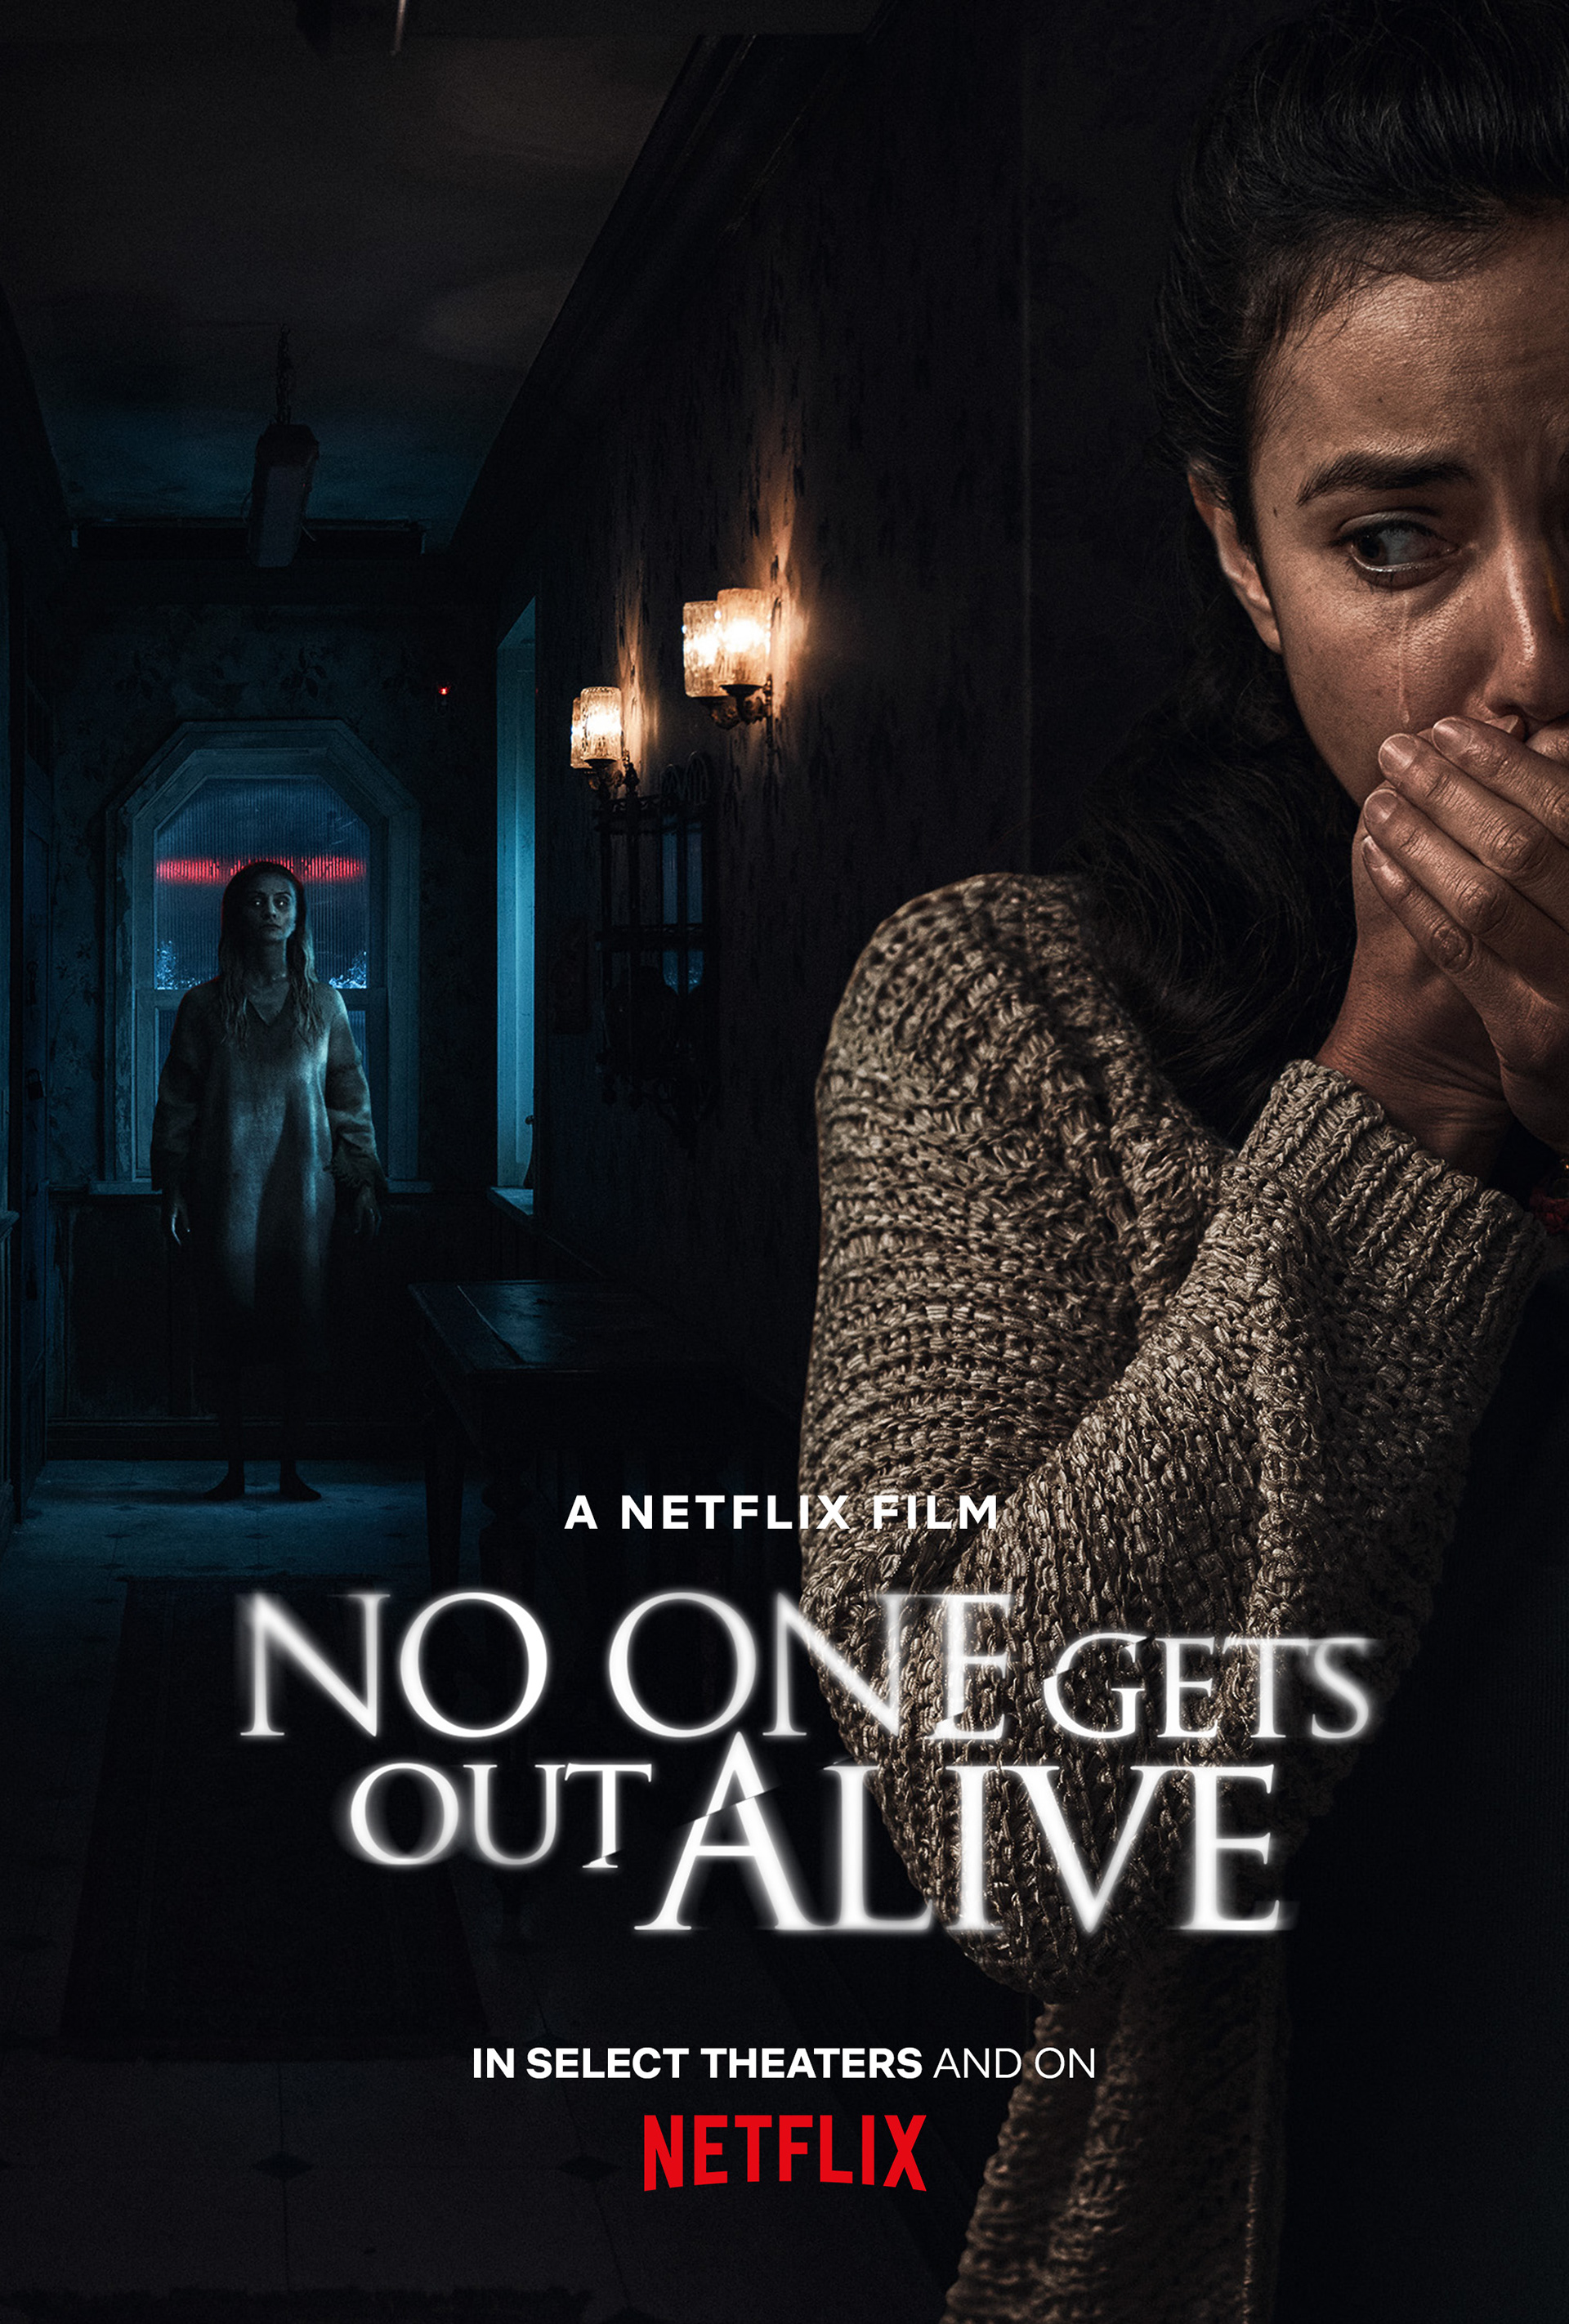 Netflix out no alive gets one